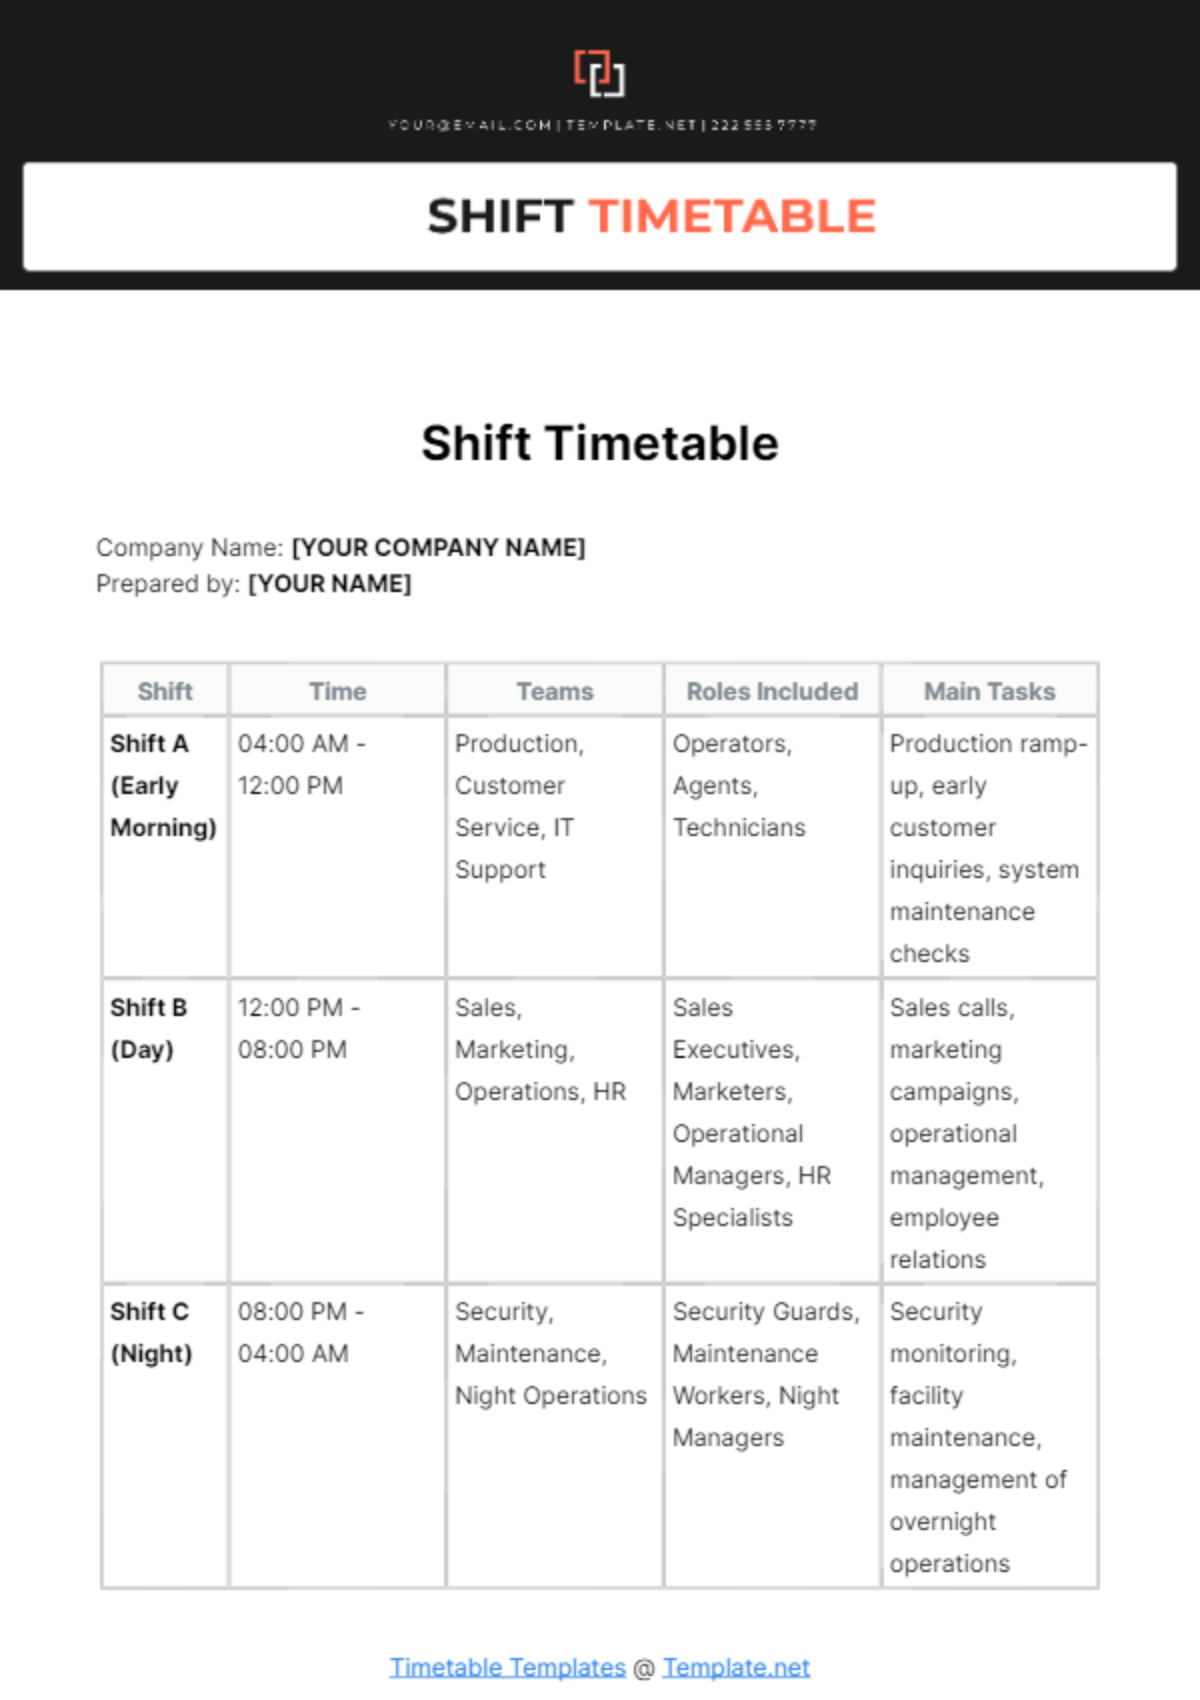 Free Shift Timetable Template